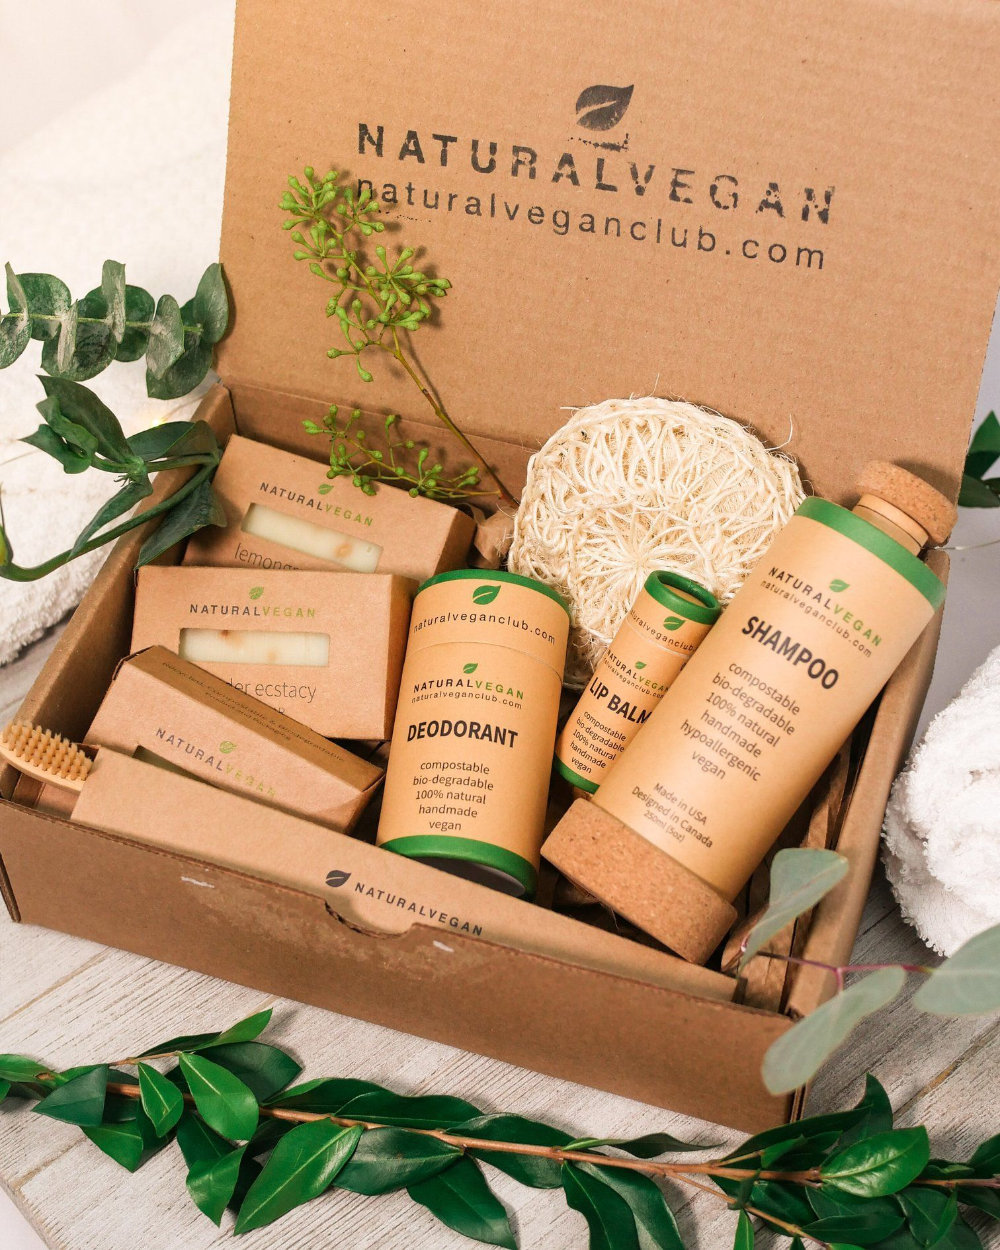 Sustainable Grooming Company Natural Vegan Sets Out To Make World's First Compostable Eco-Bottle - Sustainable Grooming Company Natural Vegan Sets Out To Make World's First Compostable Eco-Bottle -   19 natural beauty Design ideas